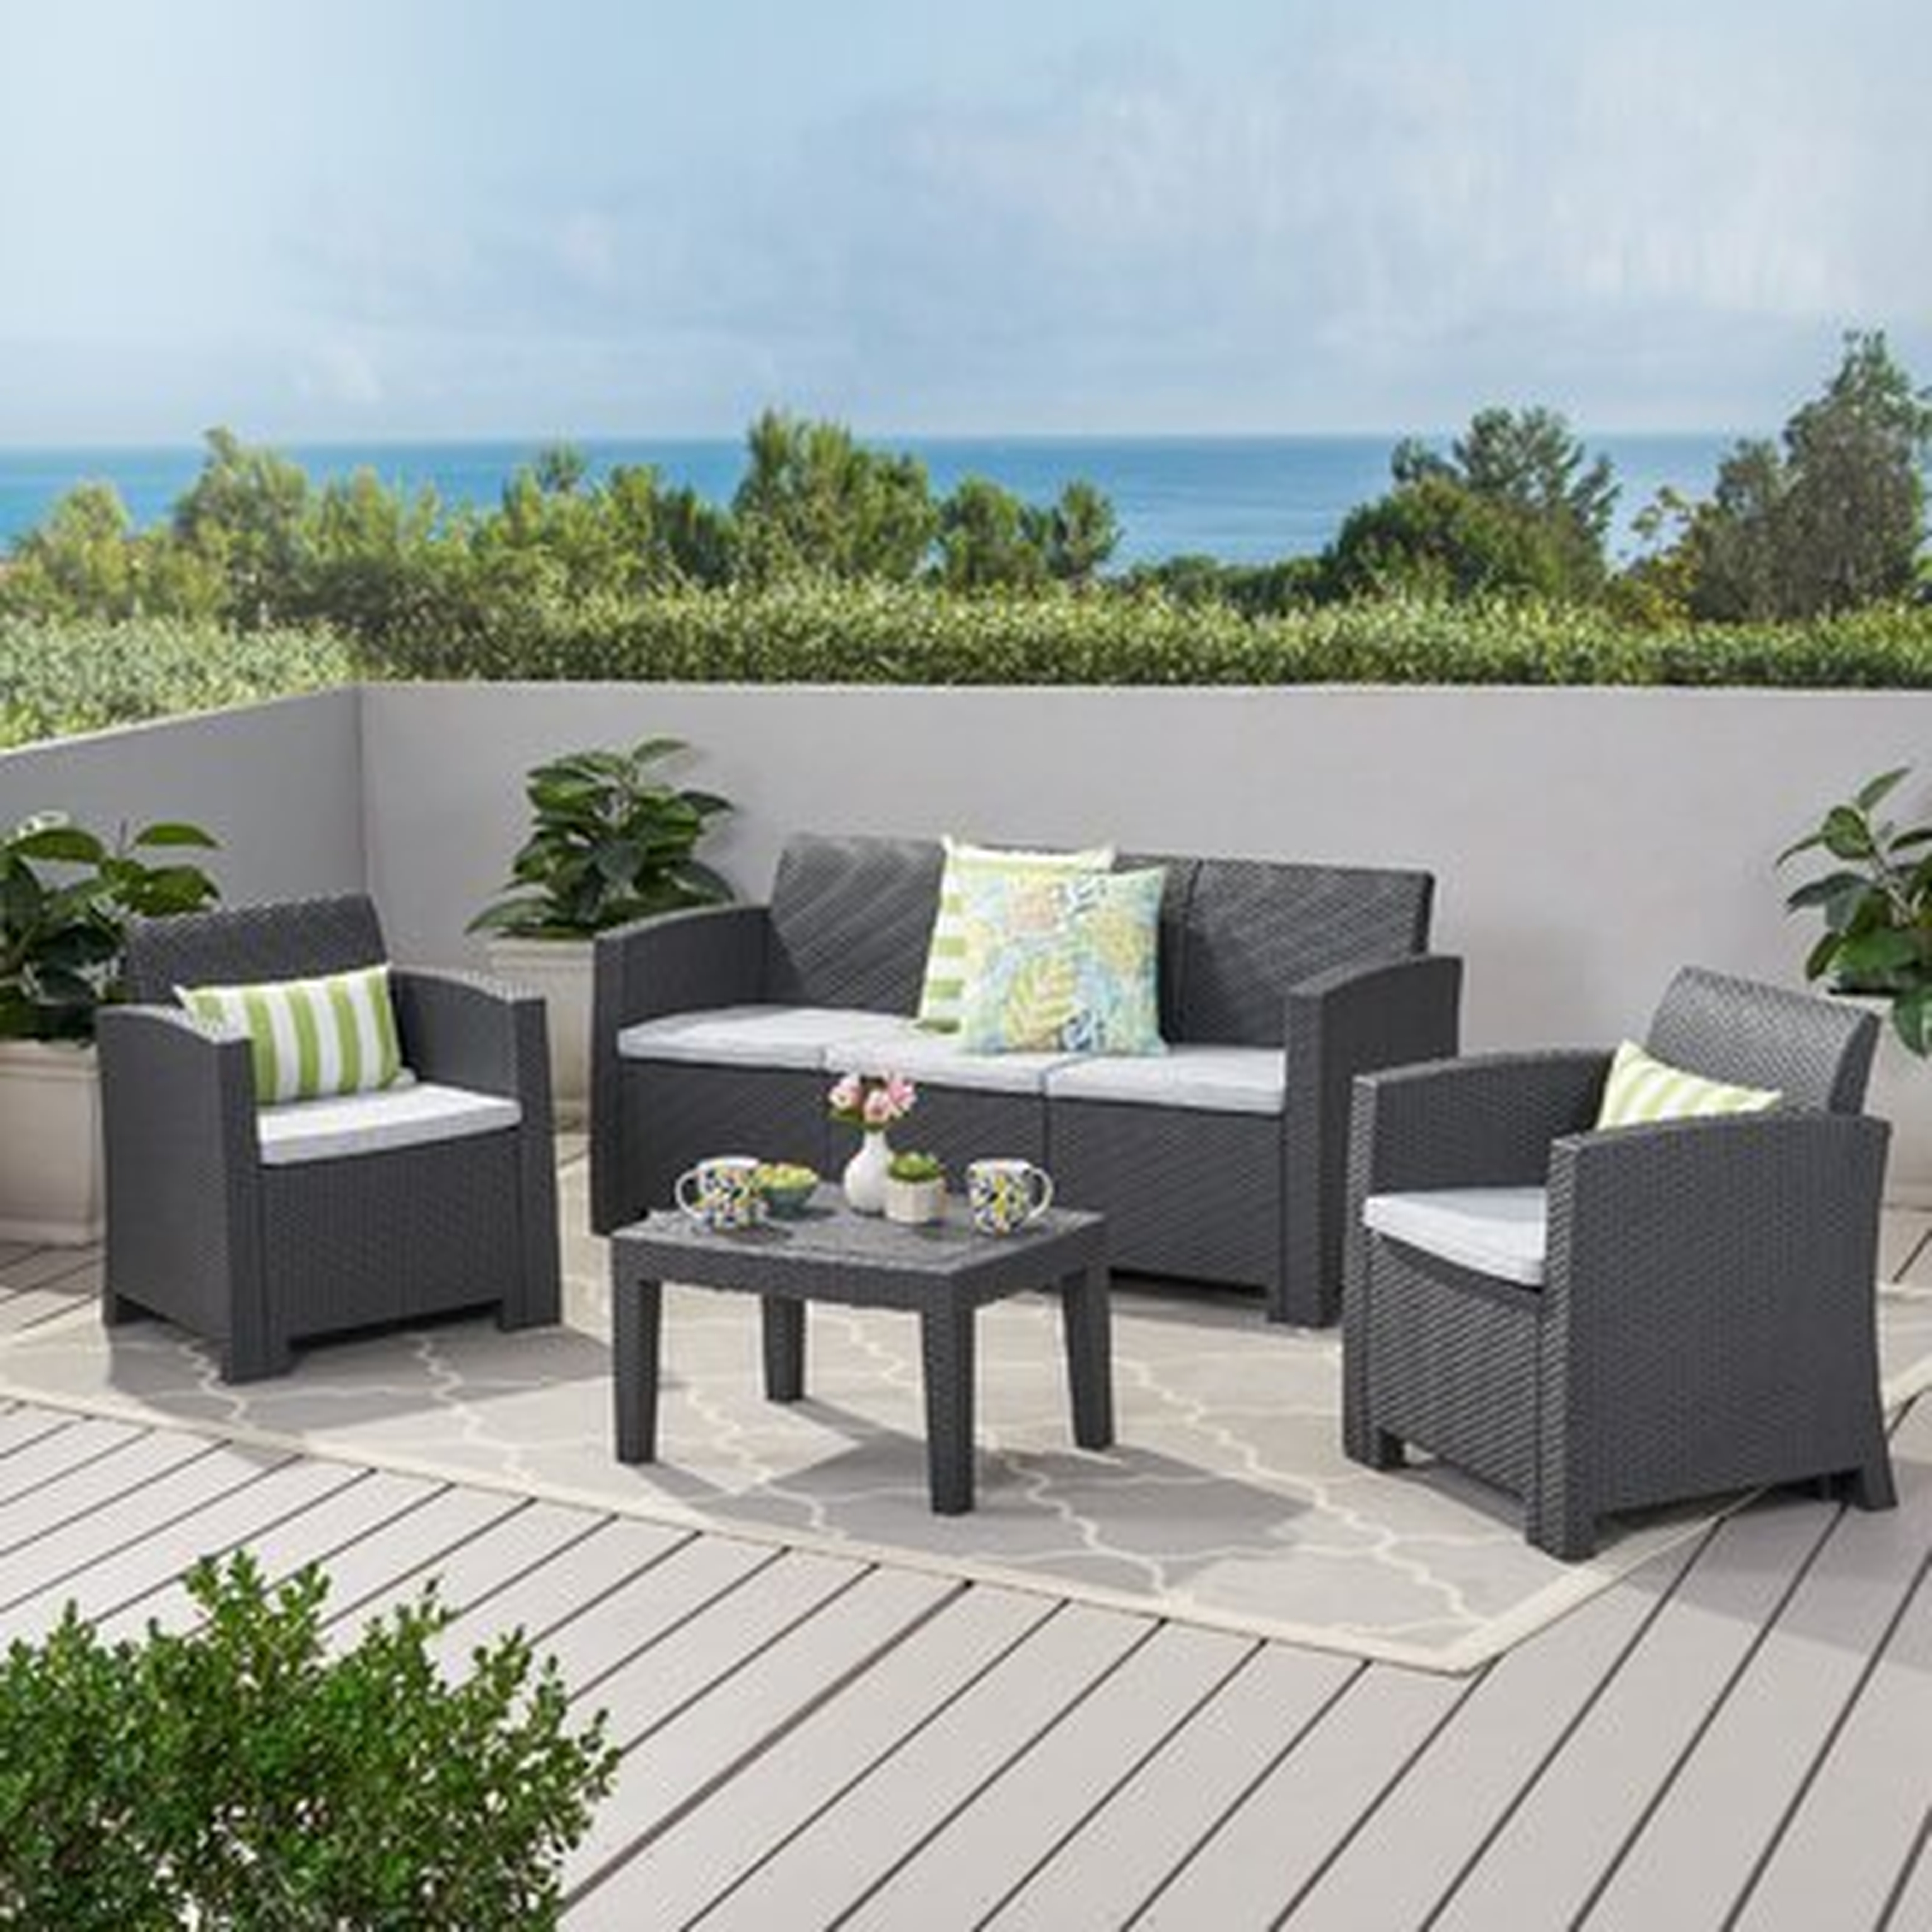 Bartz 4 Piece Sofa Seating Group with Cushions - AllModern